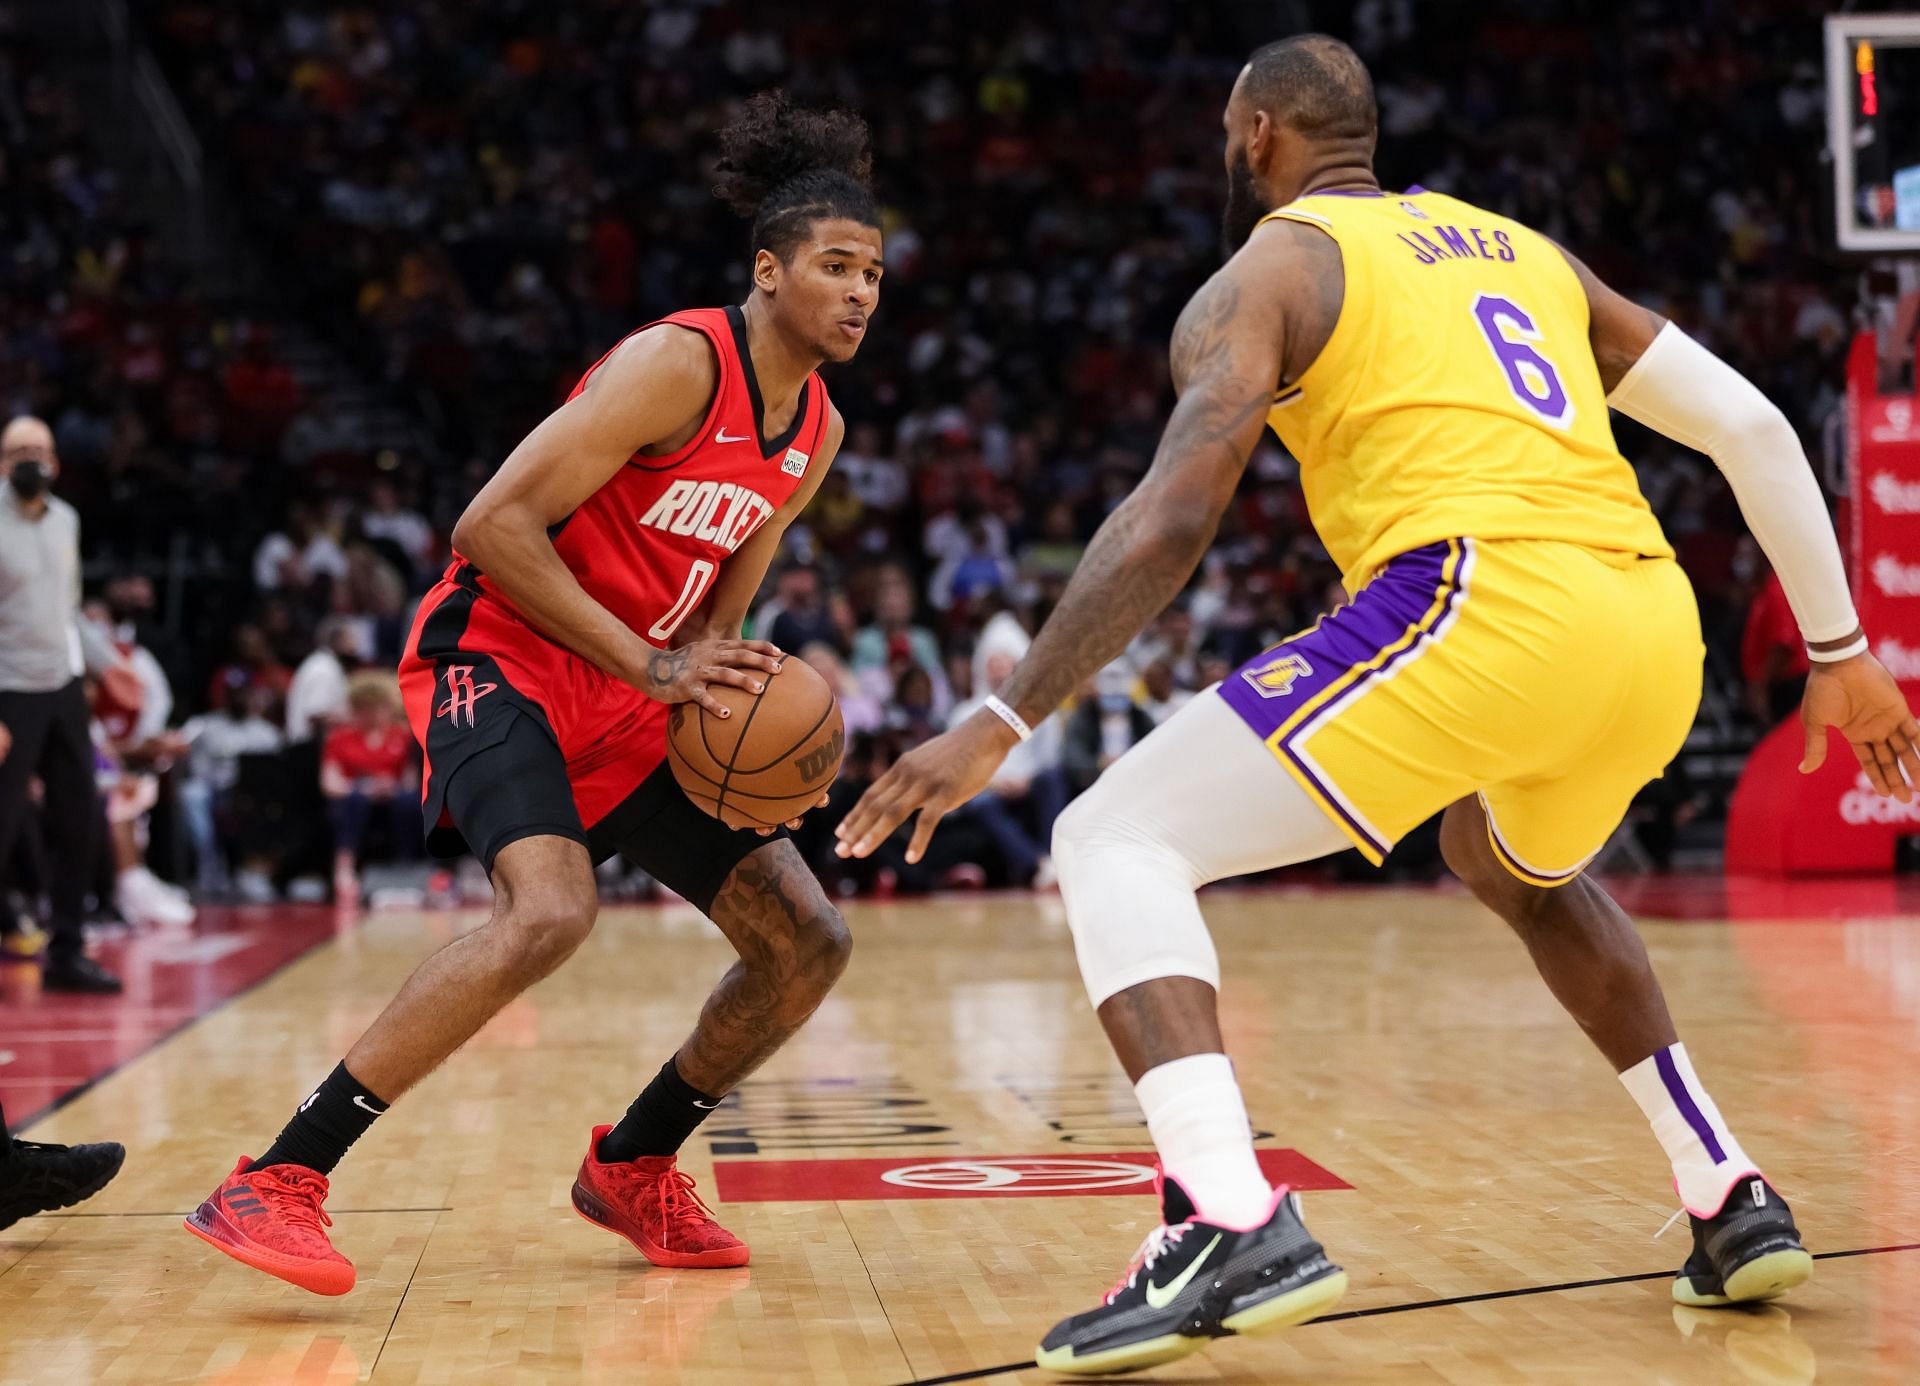 The Houston Rockets will host the LA Lakers on March 9th